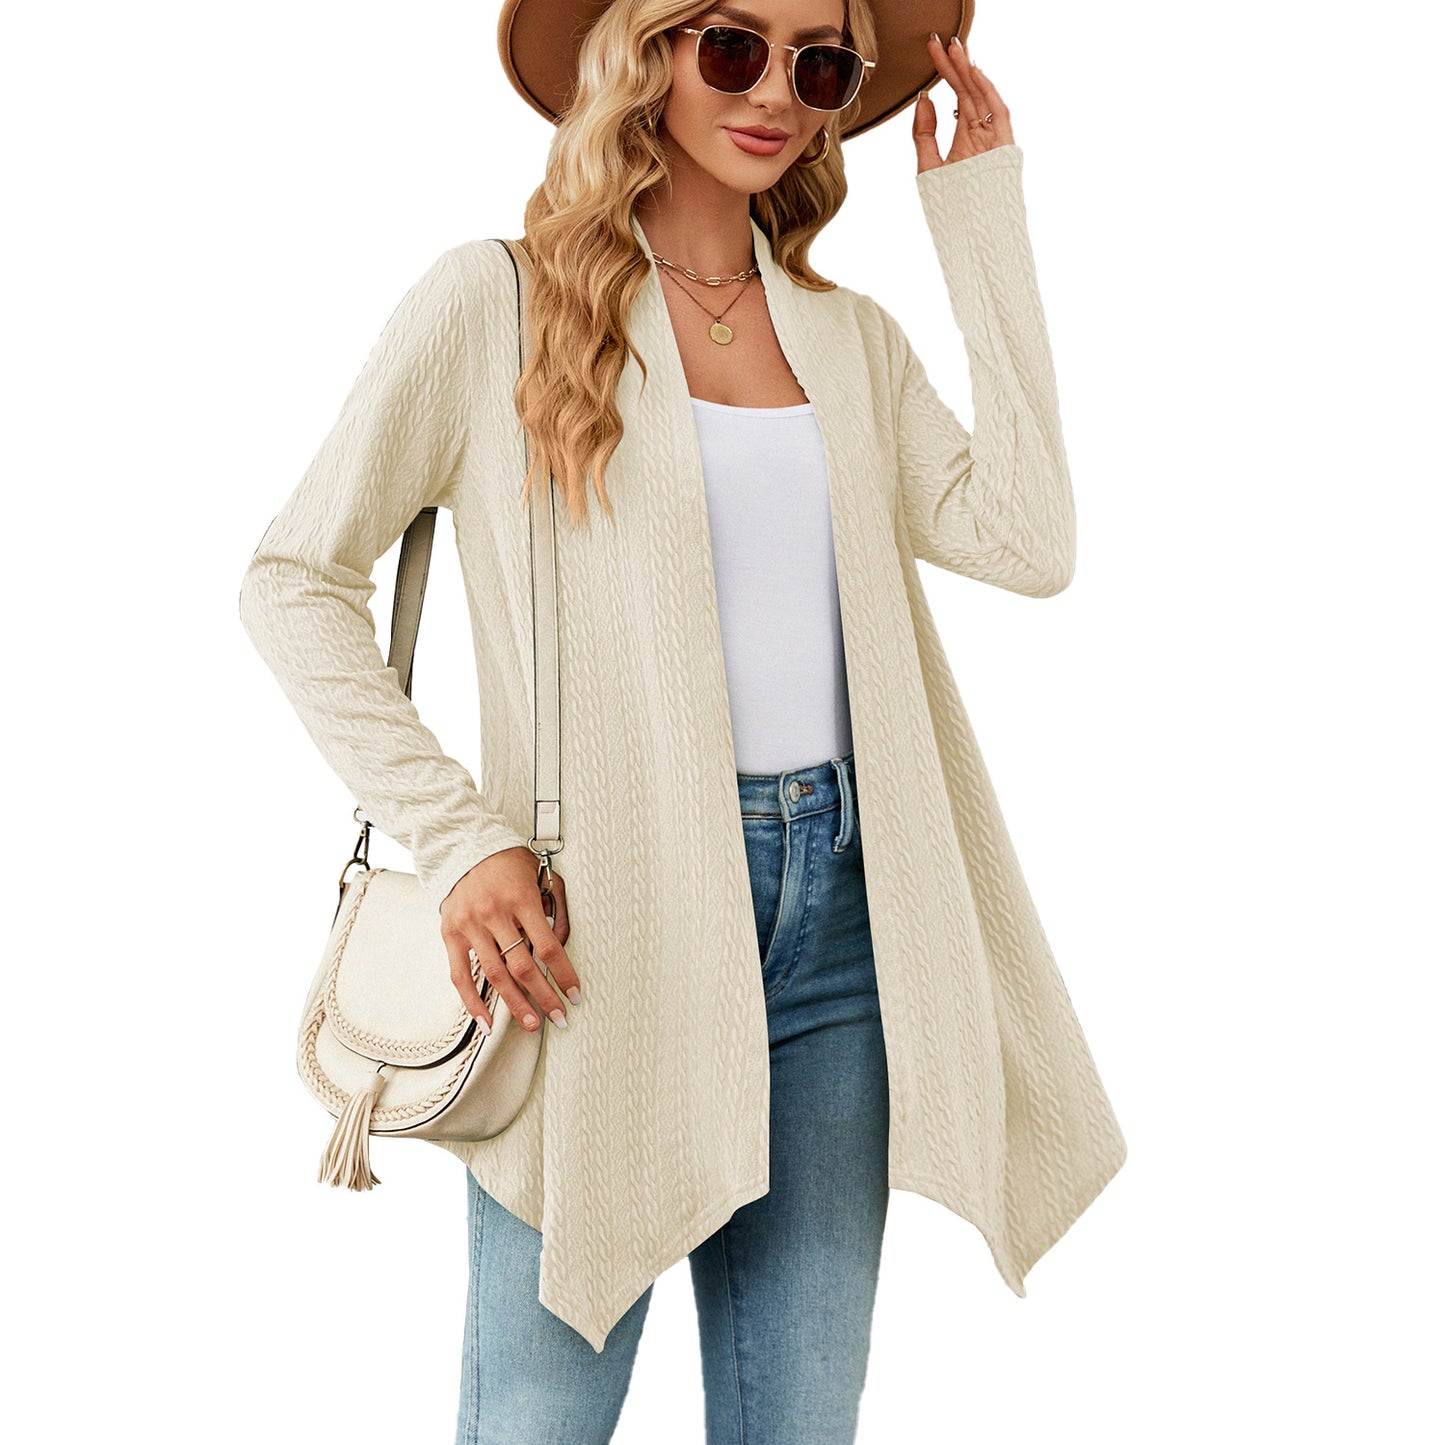 Women Clothing Autumn Winter Solid Color Loose Long Sleeves Cardigan Coat Women